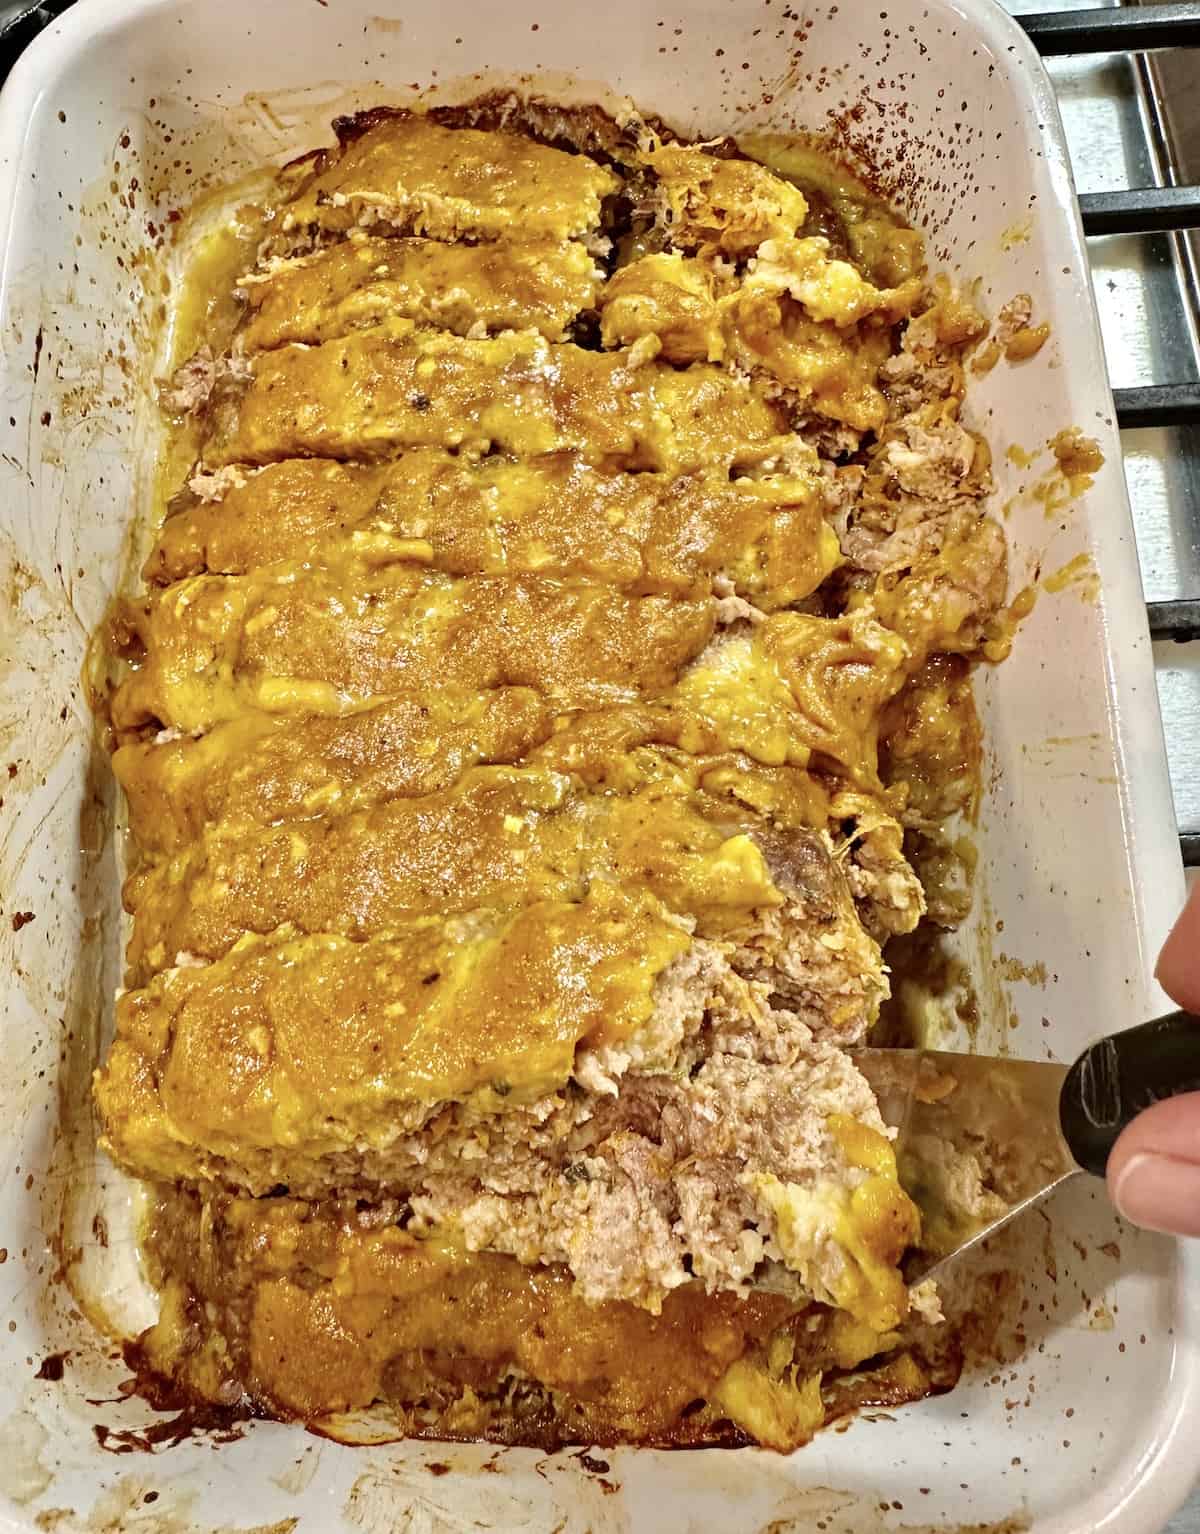 A baked meatloaf with mustard glaze on top and a spatula scooping out a serving of meatloaf.